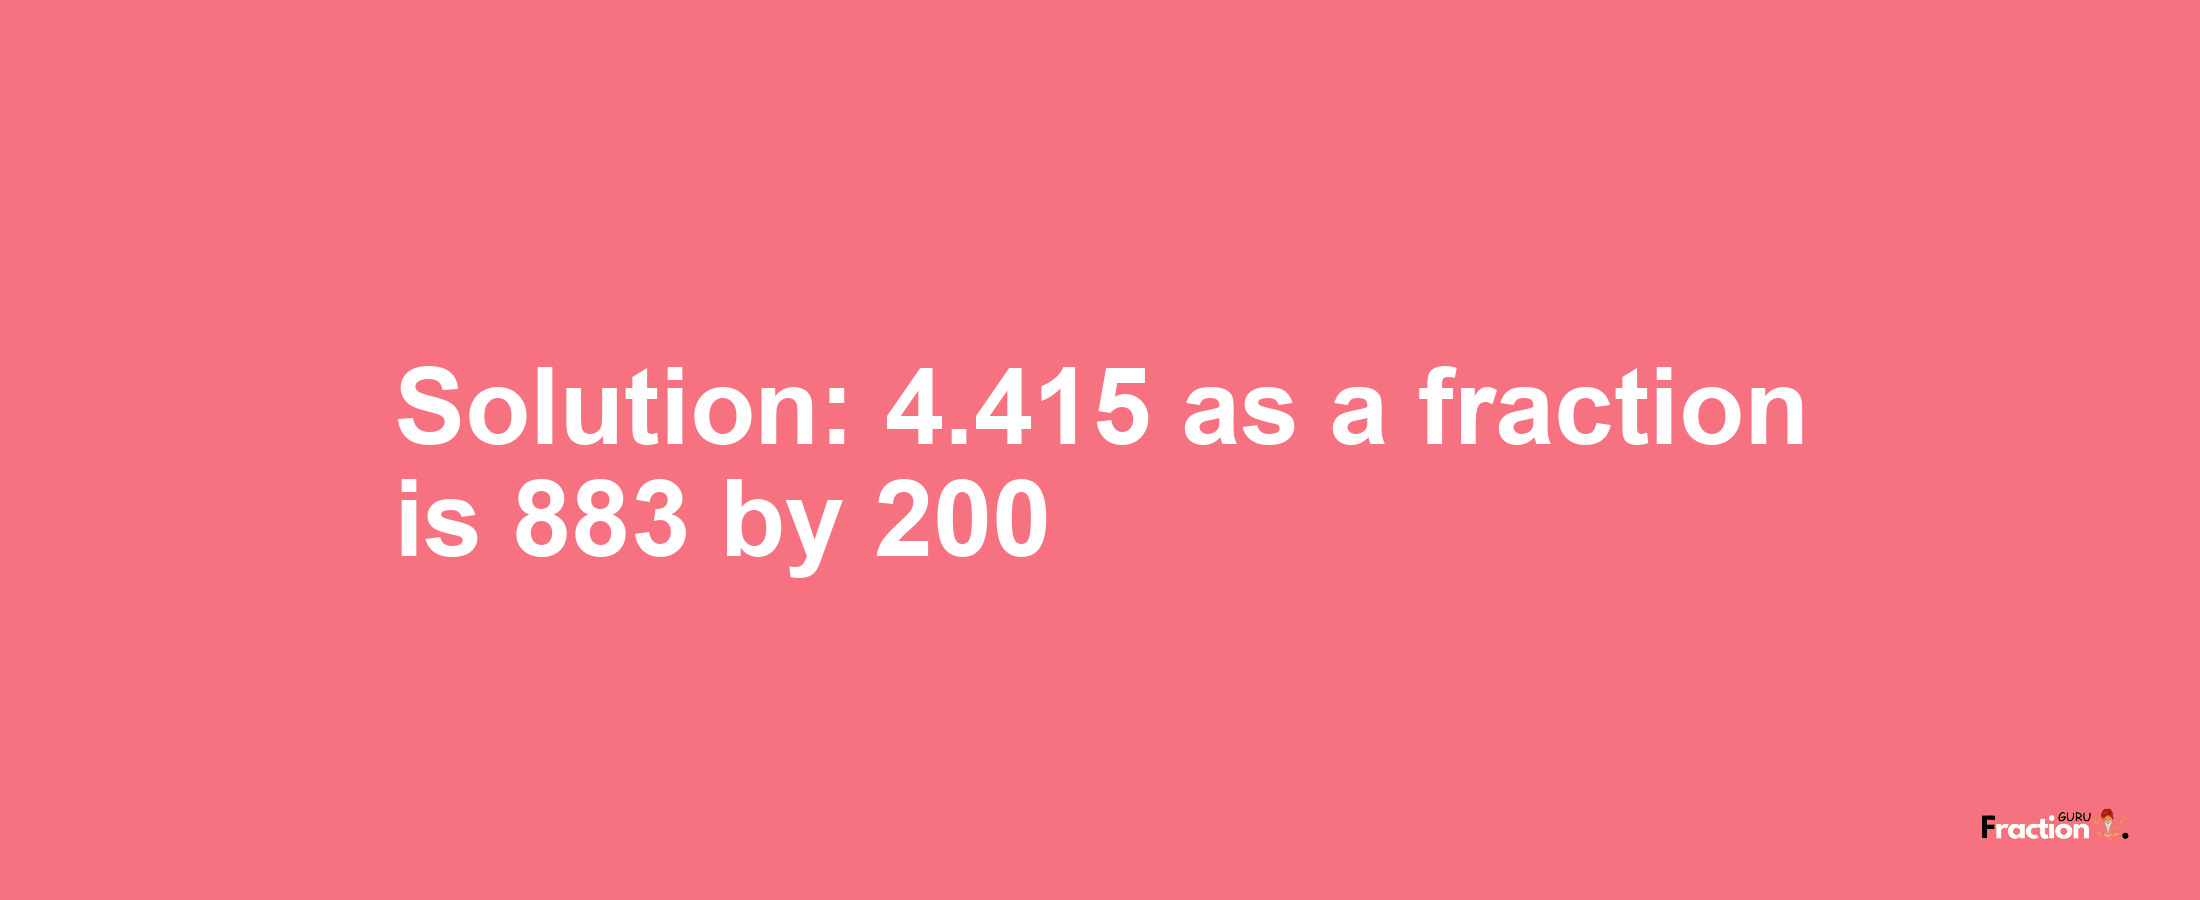 Solution:4.415 as a fraction is 883/200